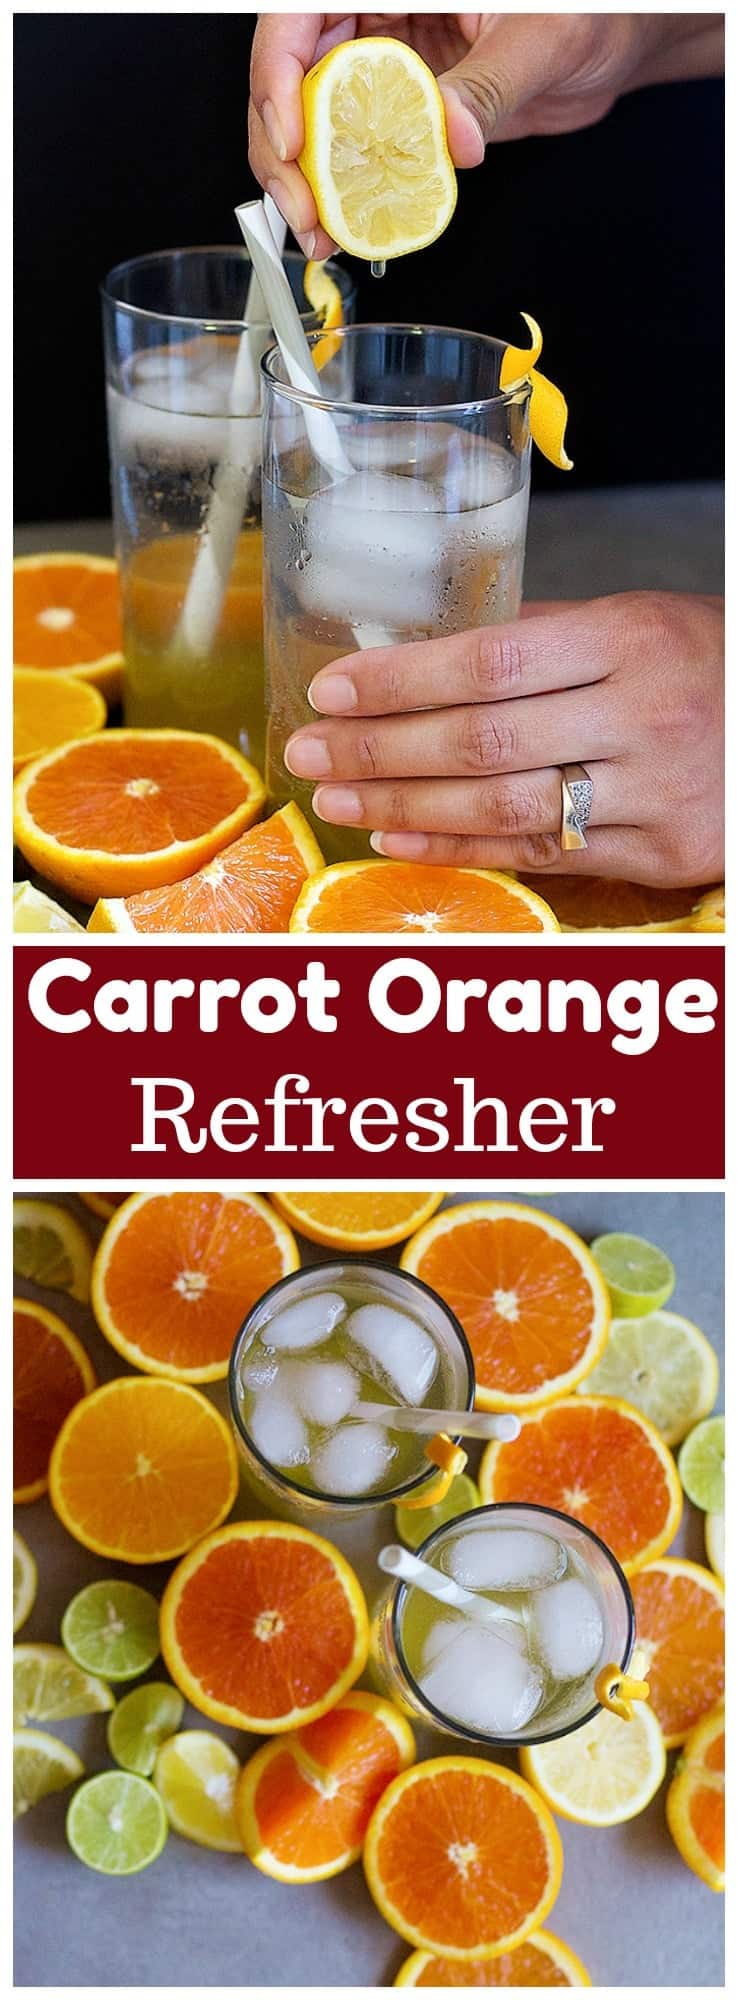 Carrot Orange Refresher is perfect for your warm summer days. Make a batch and enjoy it for a long time with ice and drops of lemon juice!